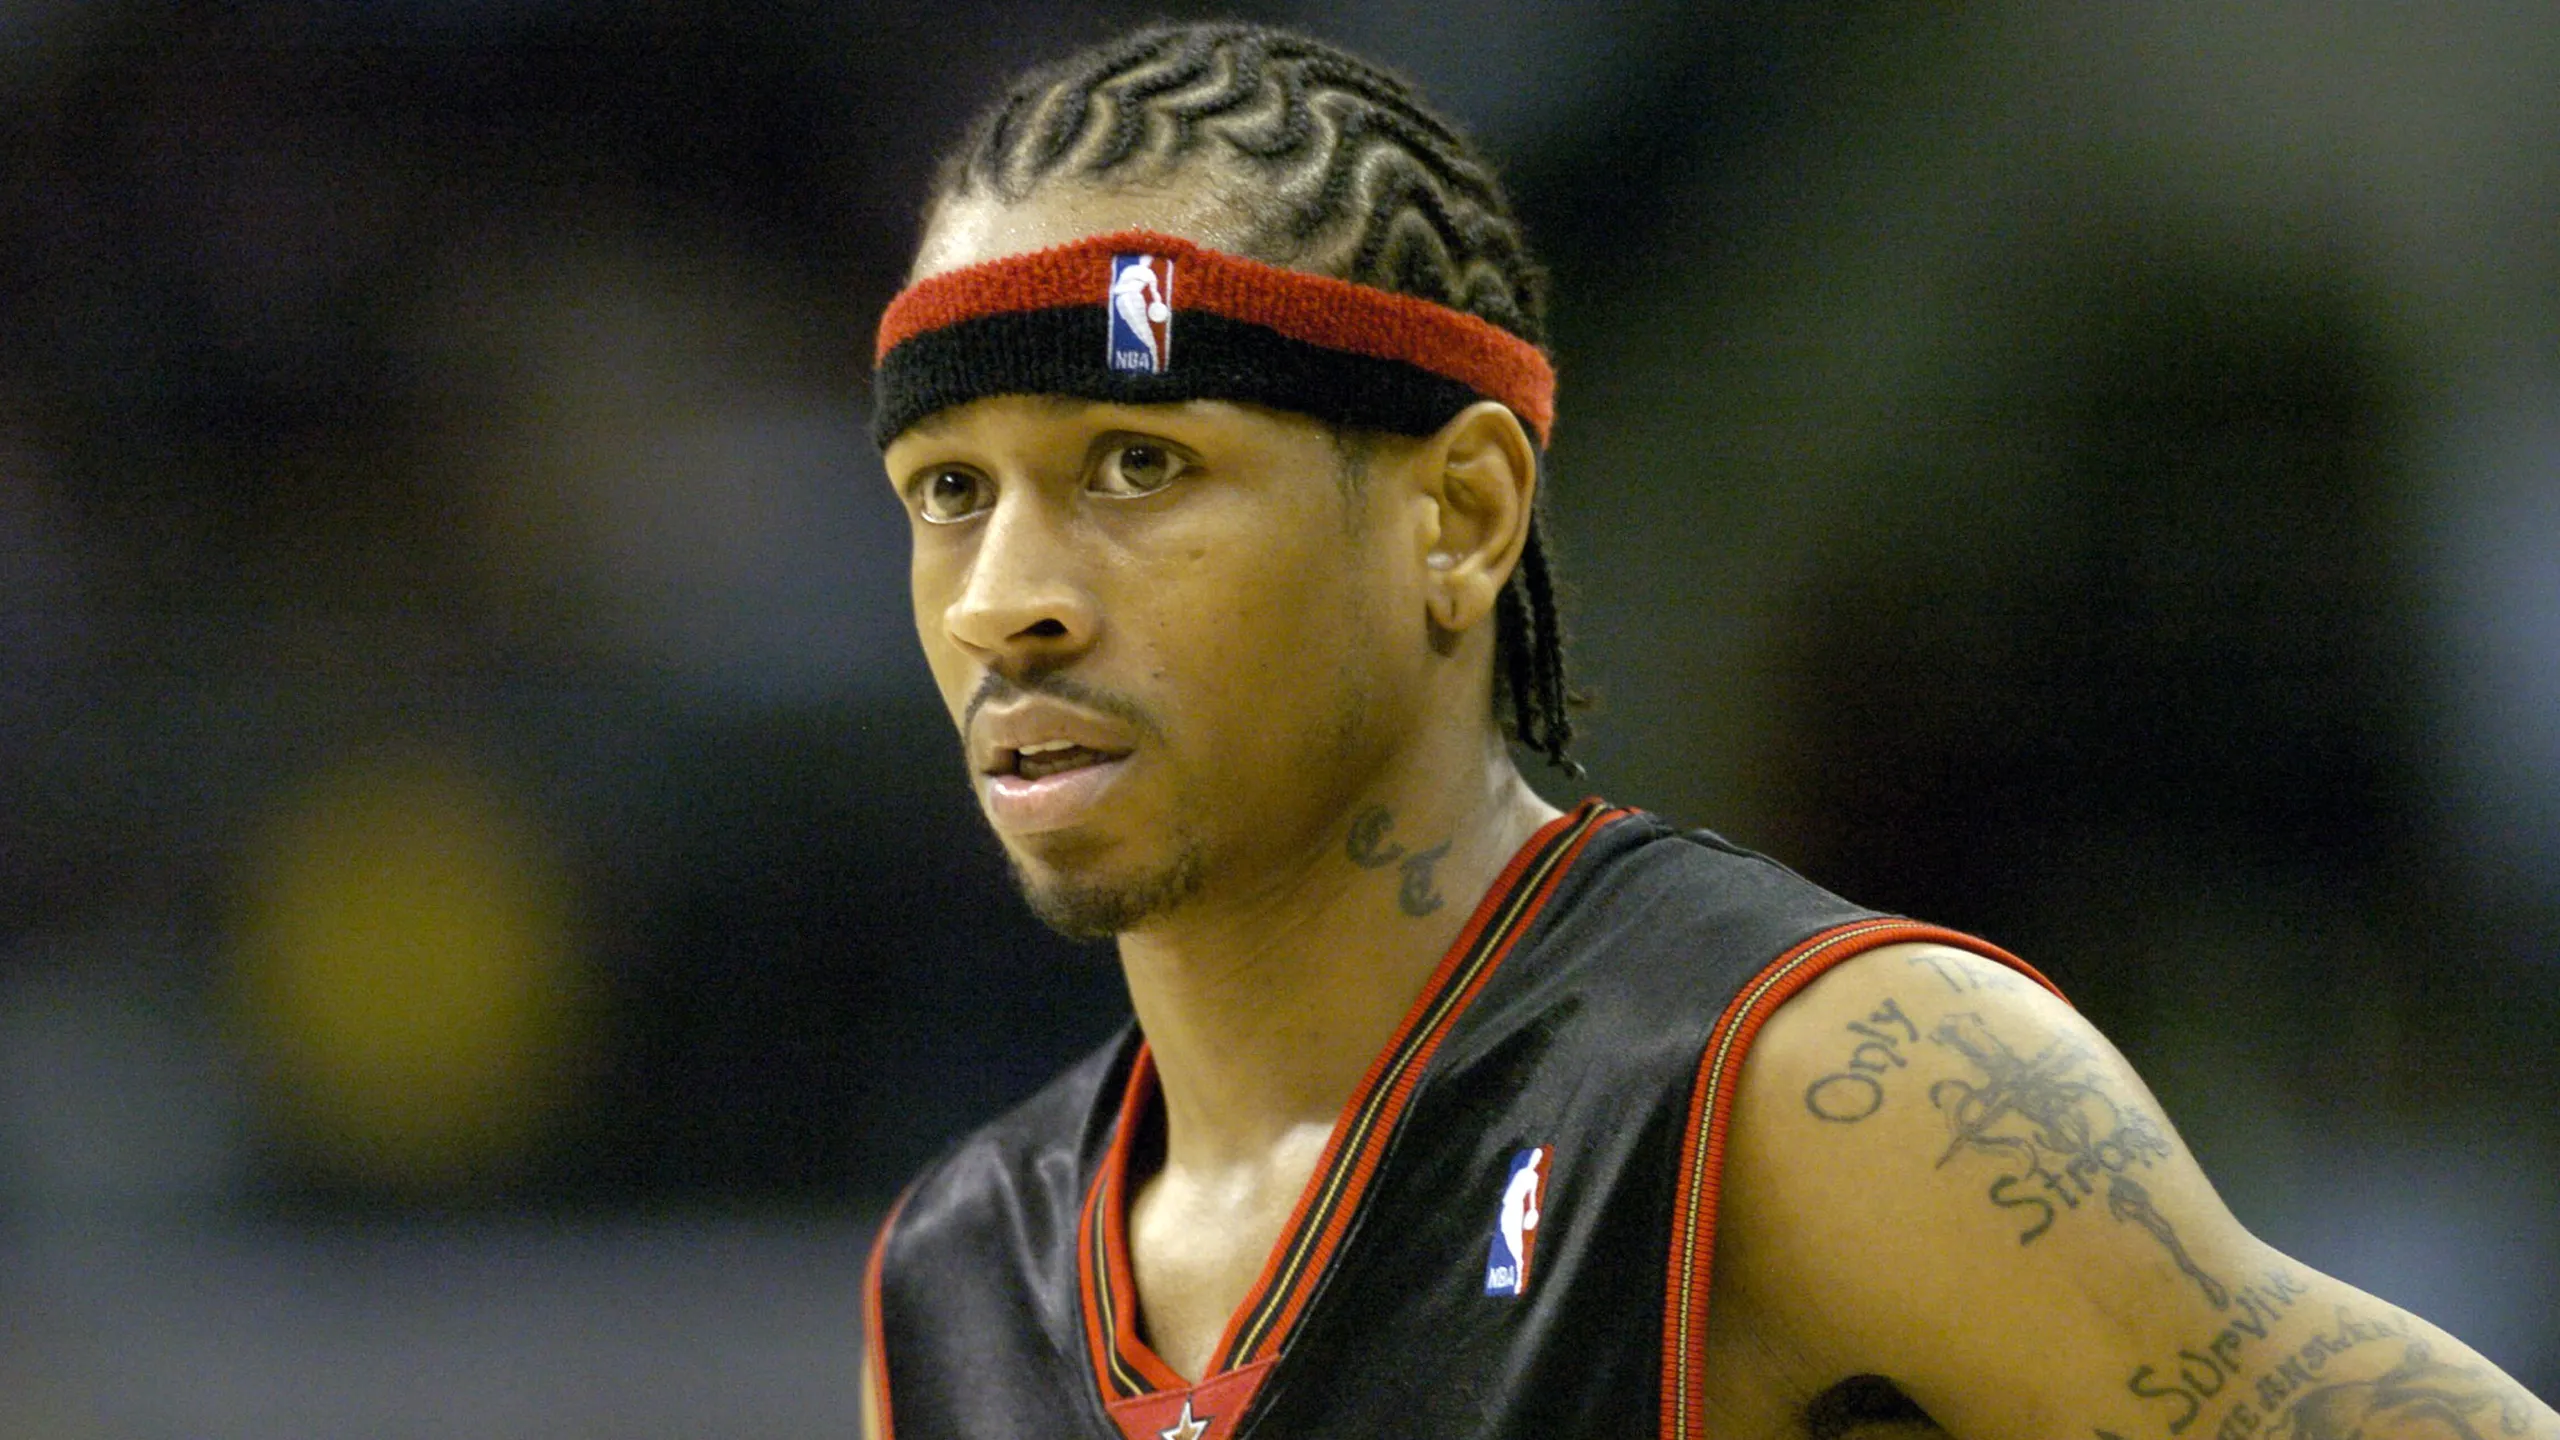 Allen Iverson to go to US for surgery